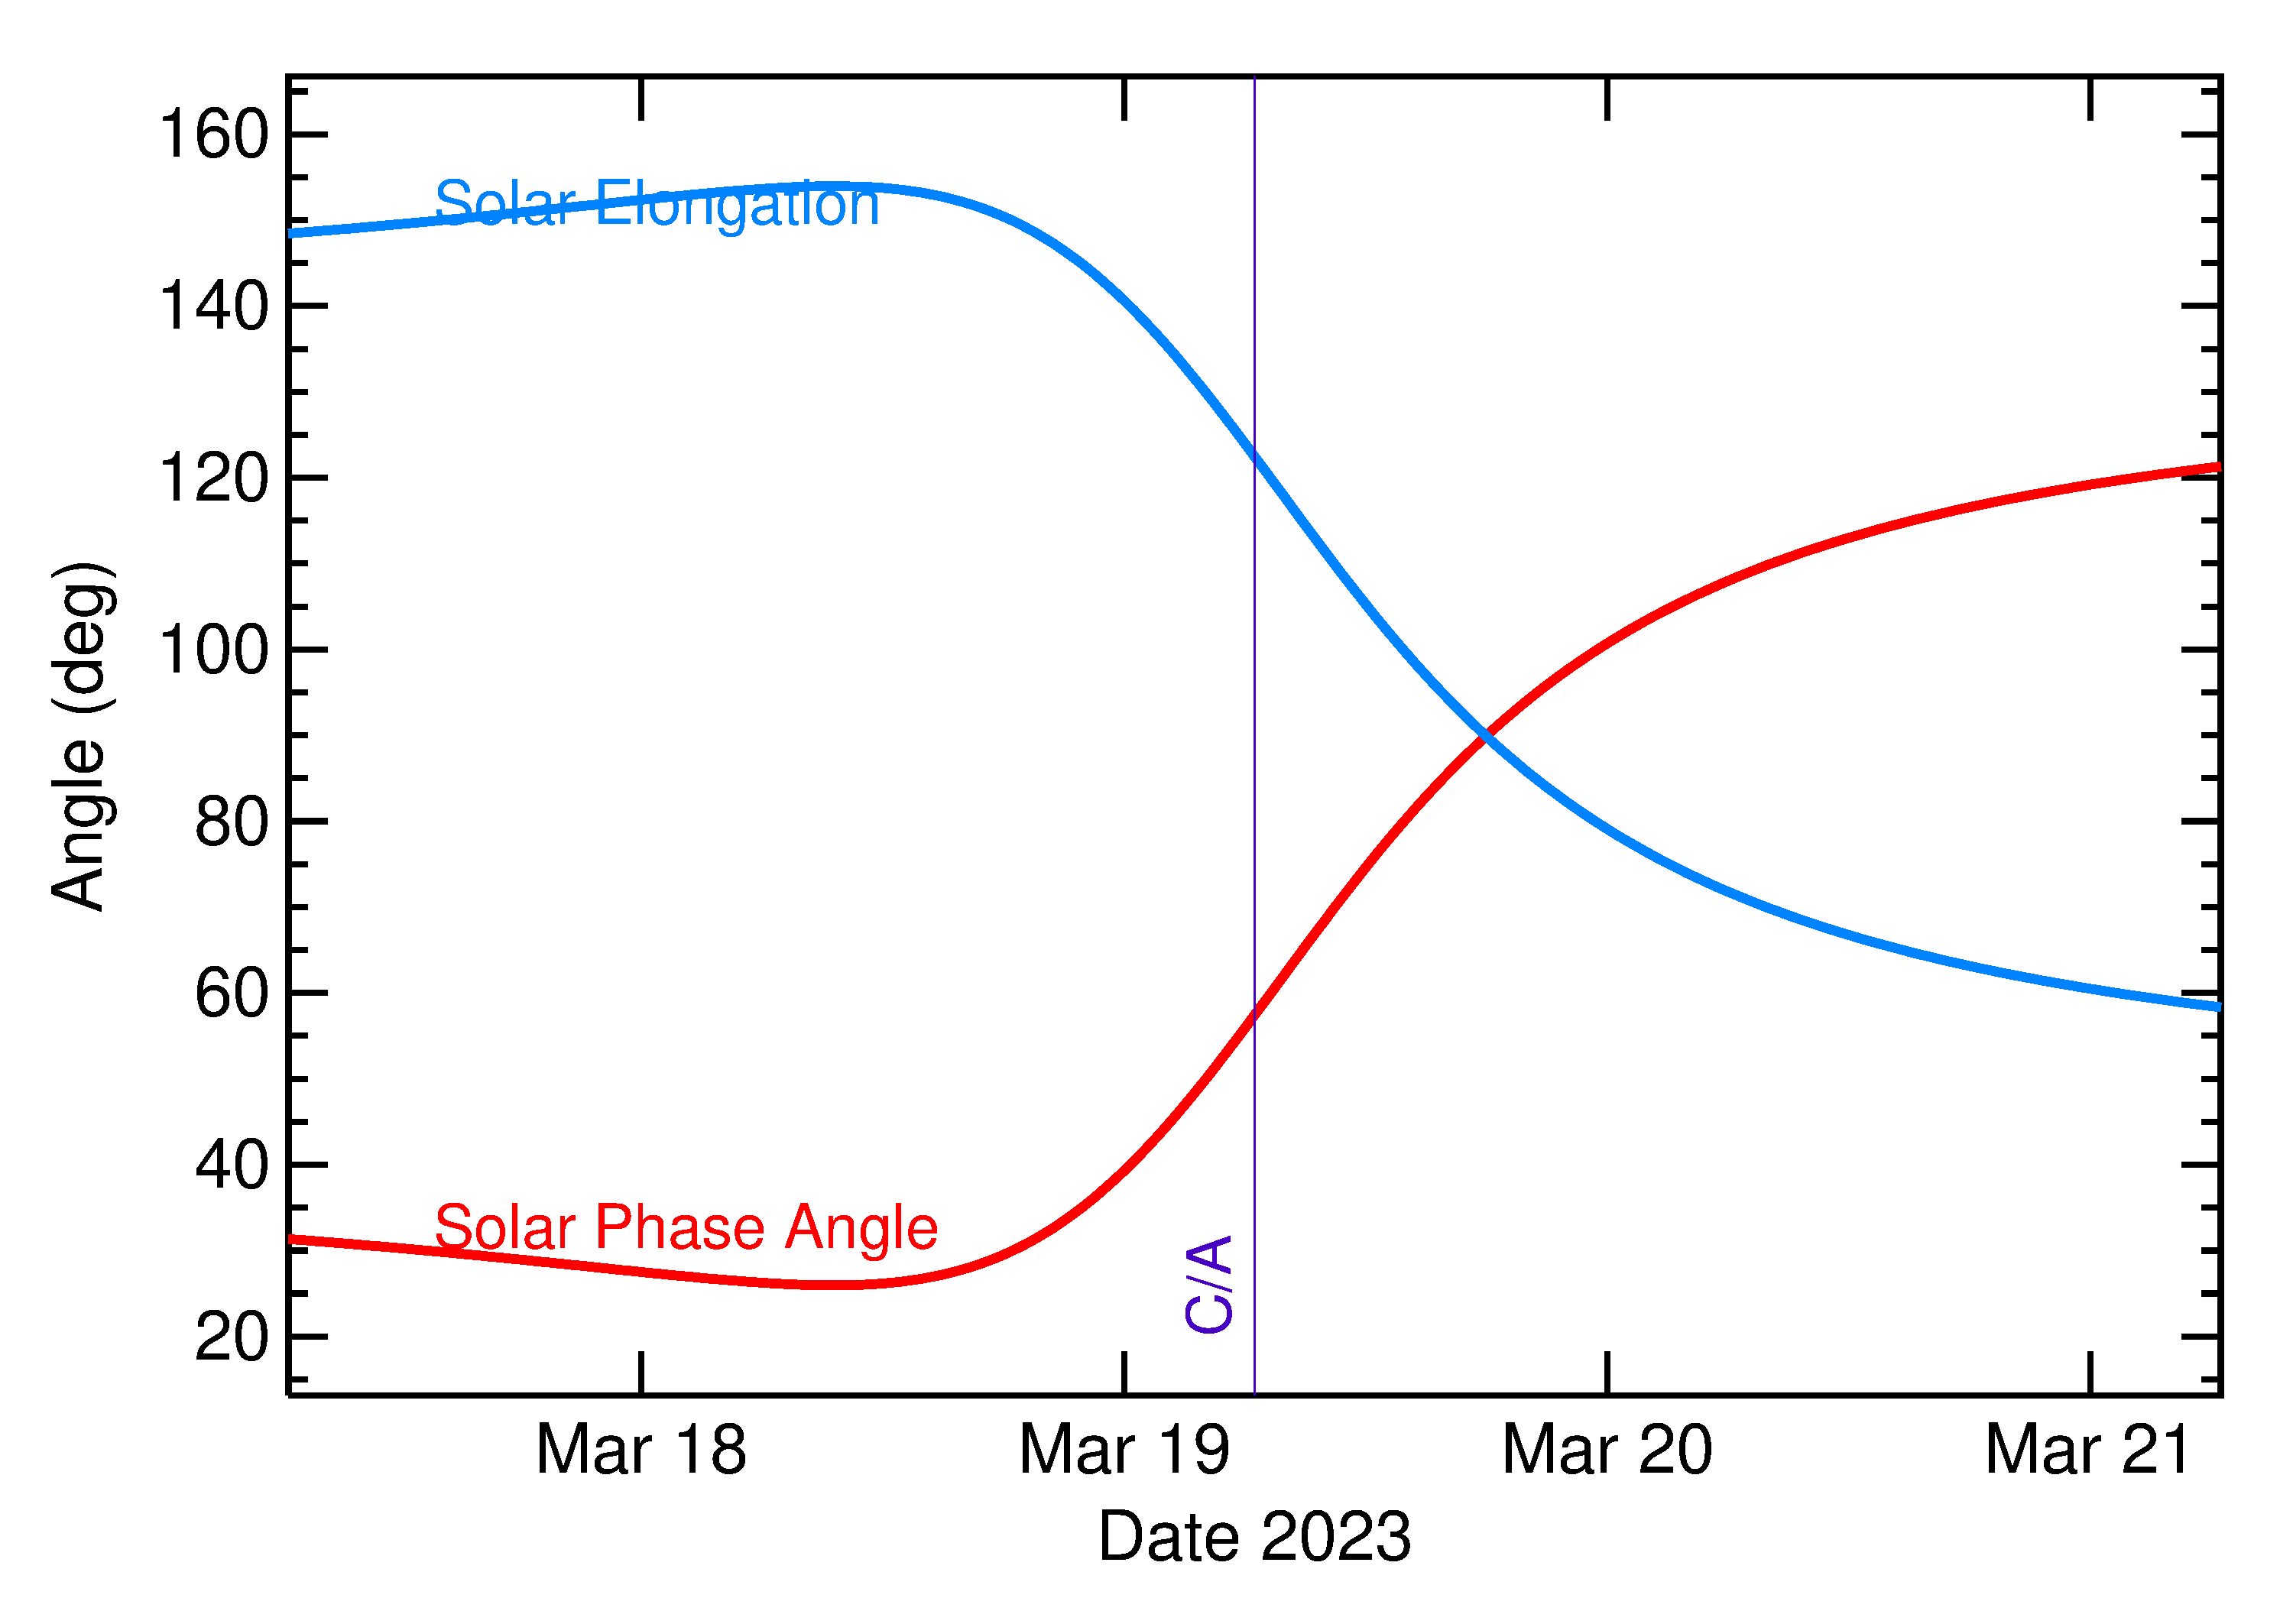 Solar Elongation and Solar Phase Angle of 2023 FO in the days around closest approach